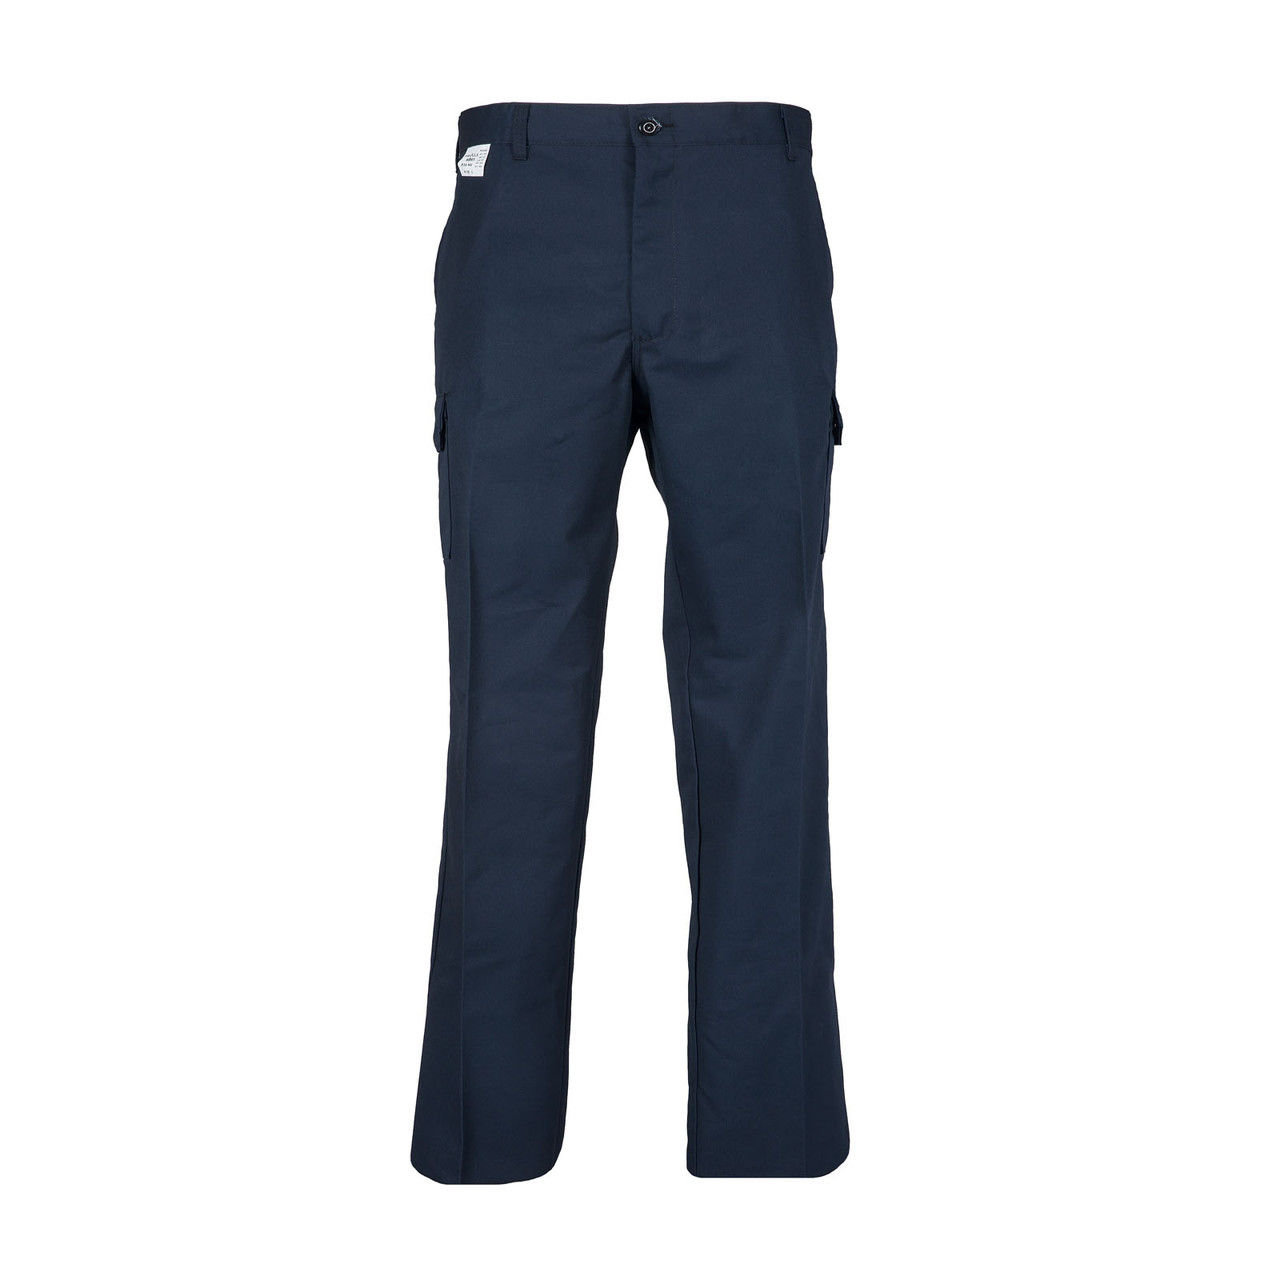 Is it possible to return the P24NV Men's Cargo Industrial navy blue work pants if customized?